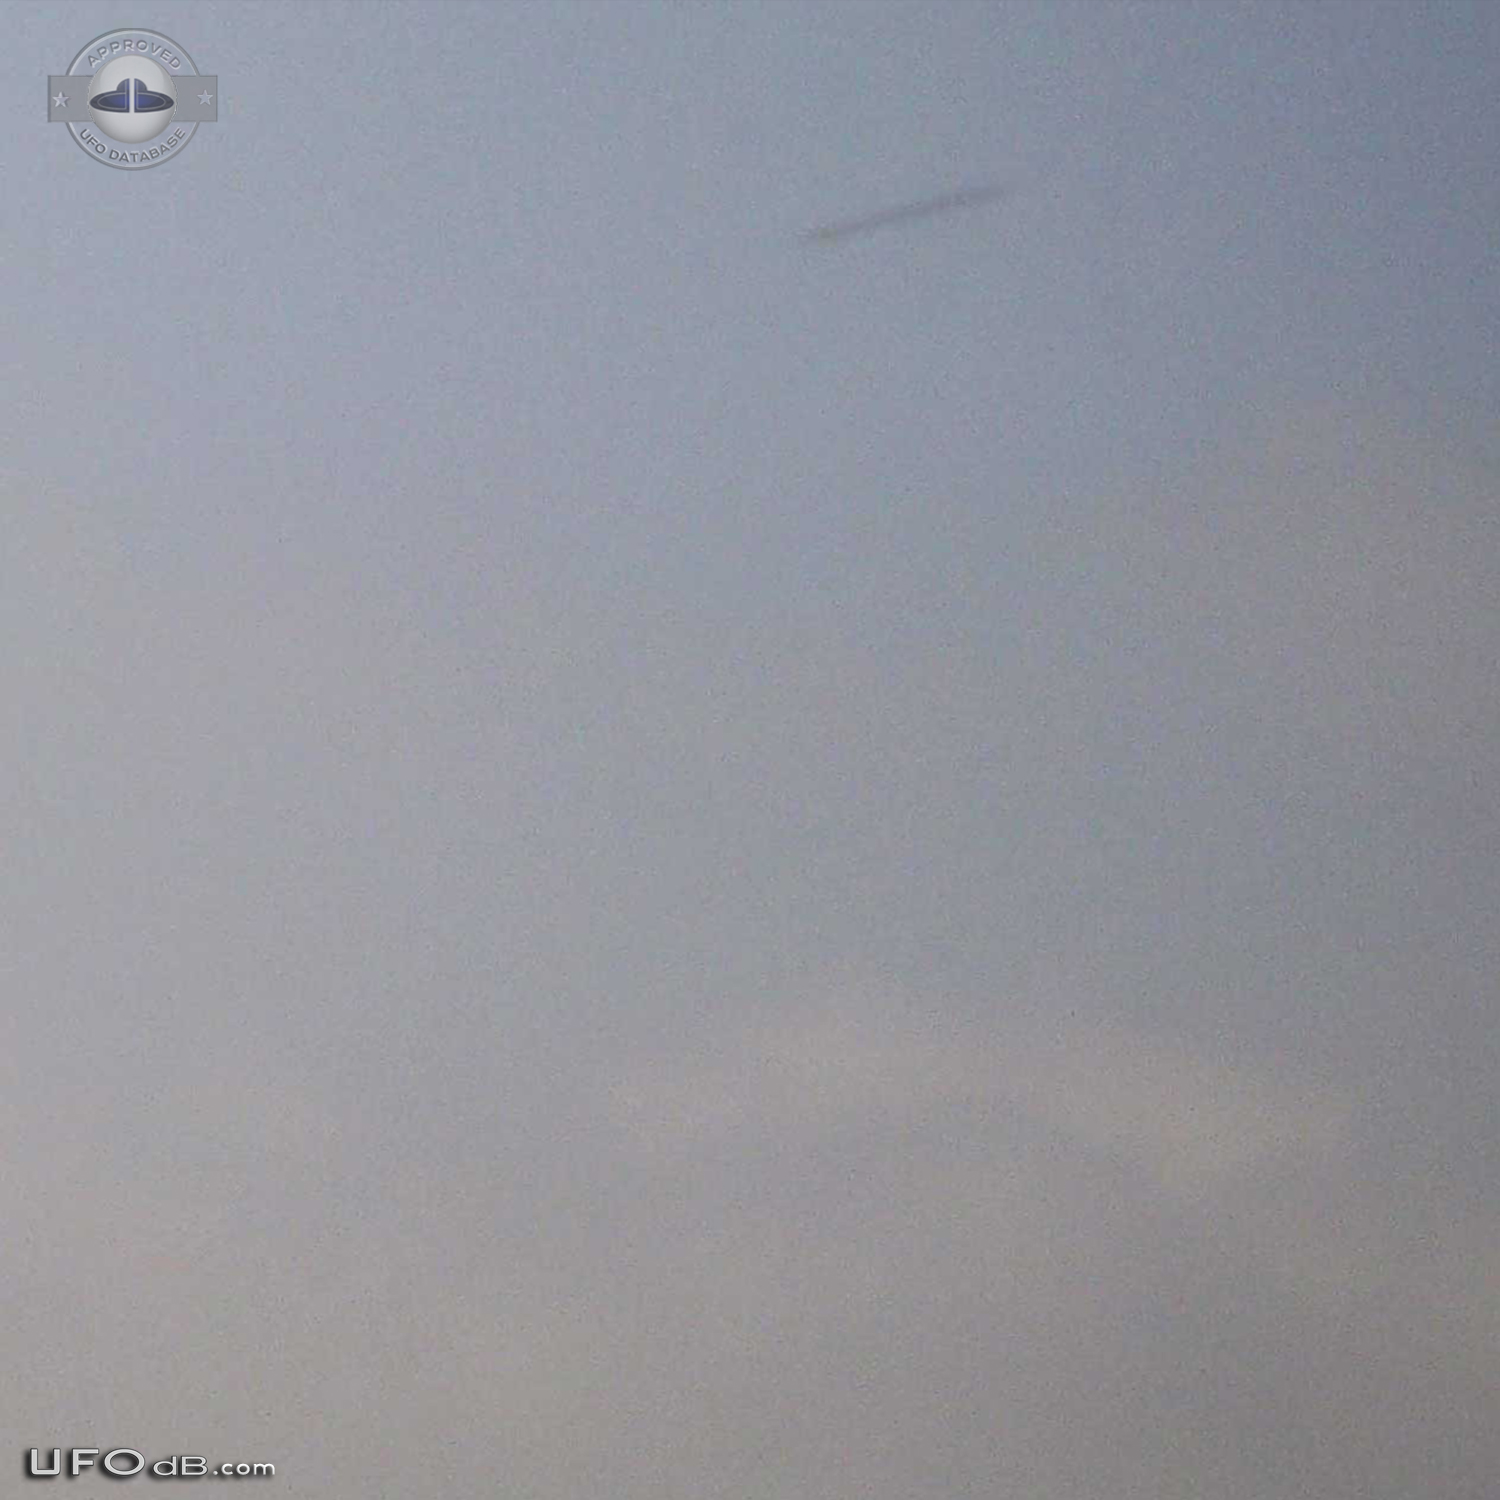 Many UFO sightings in Lebanon vilage got citizens to open their minds  UFO Picture #438-2